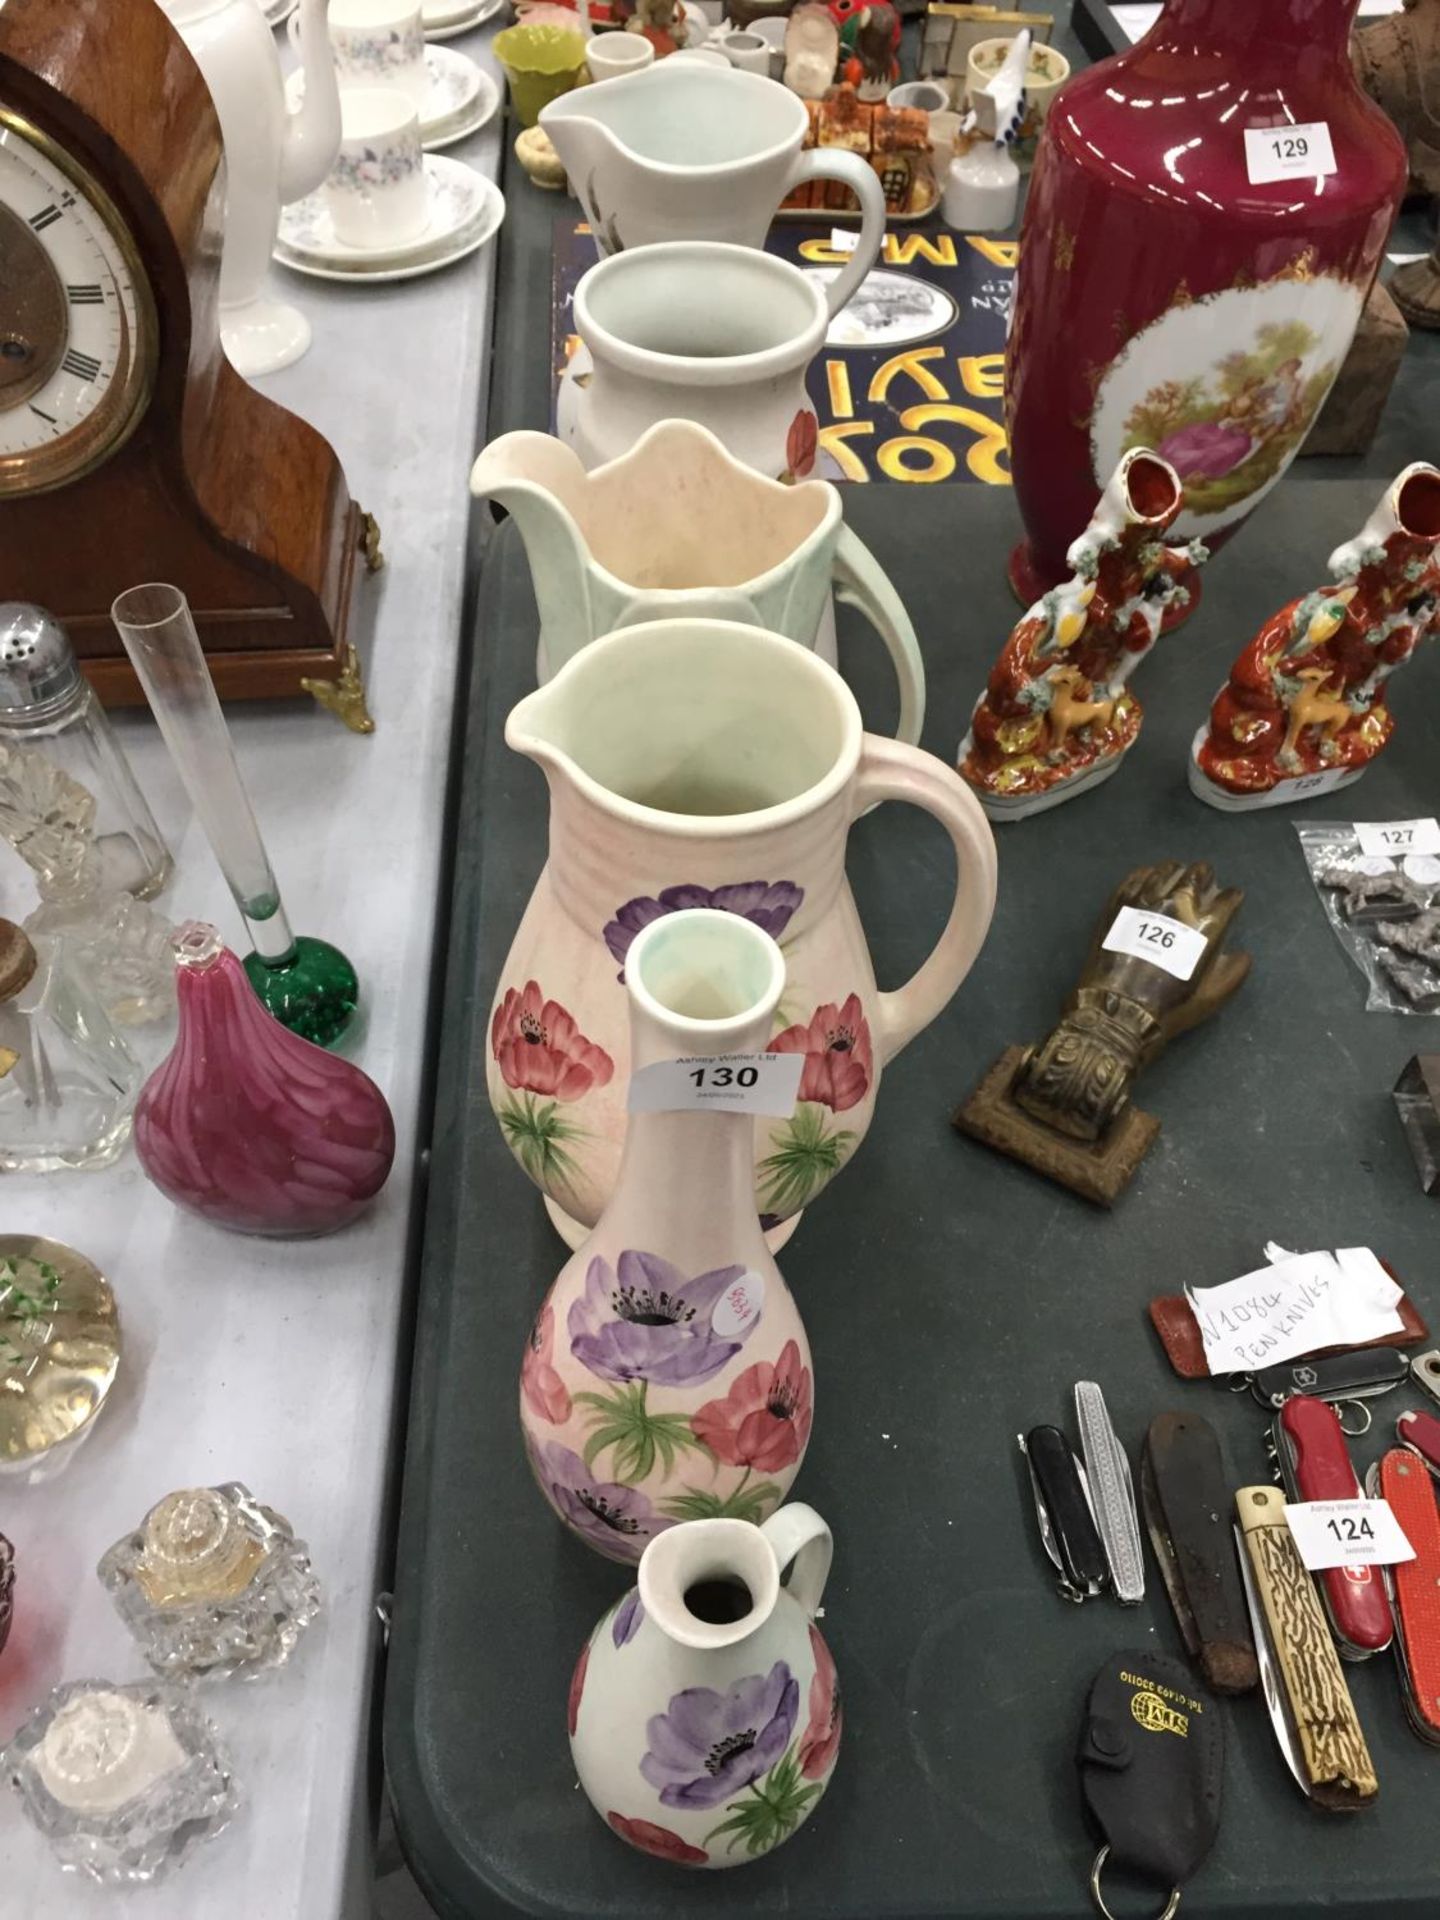 A COLLECTION OF RADLEY CERAMICS TO INCLUDE VASES AND JUGS - 6 IN TOTAL